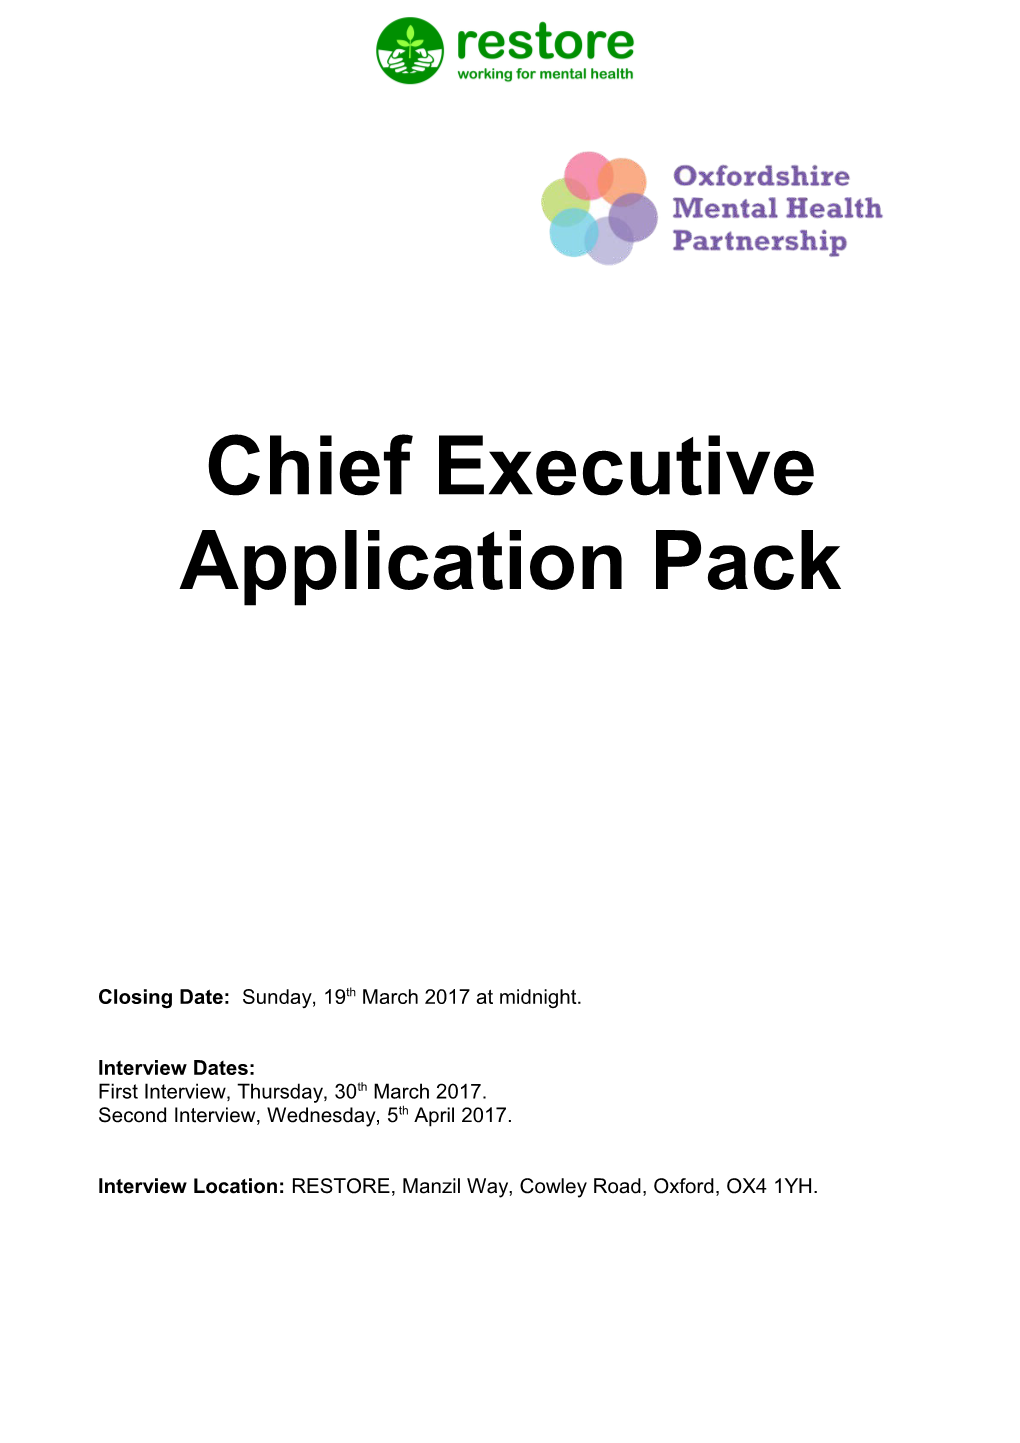 Chief Executive Application Pack